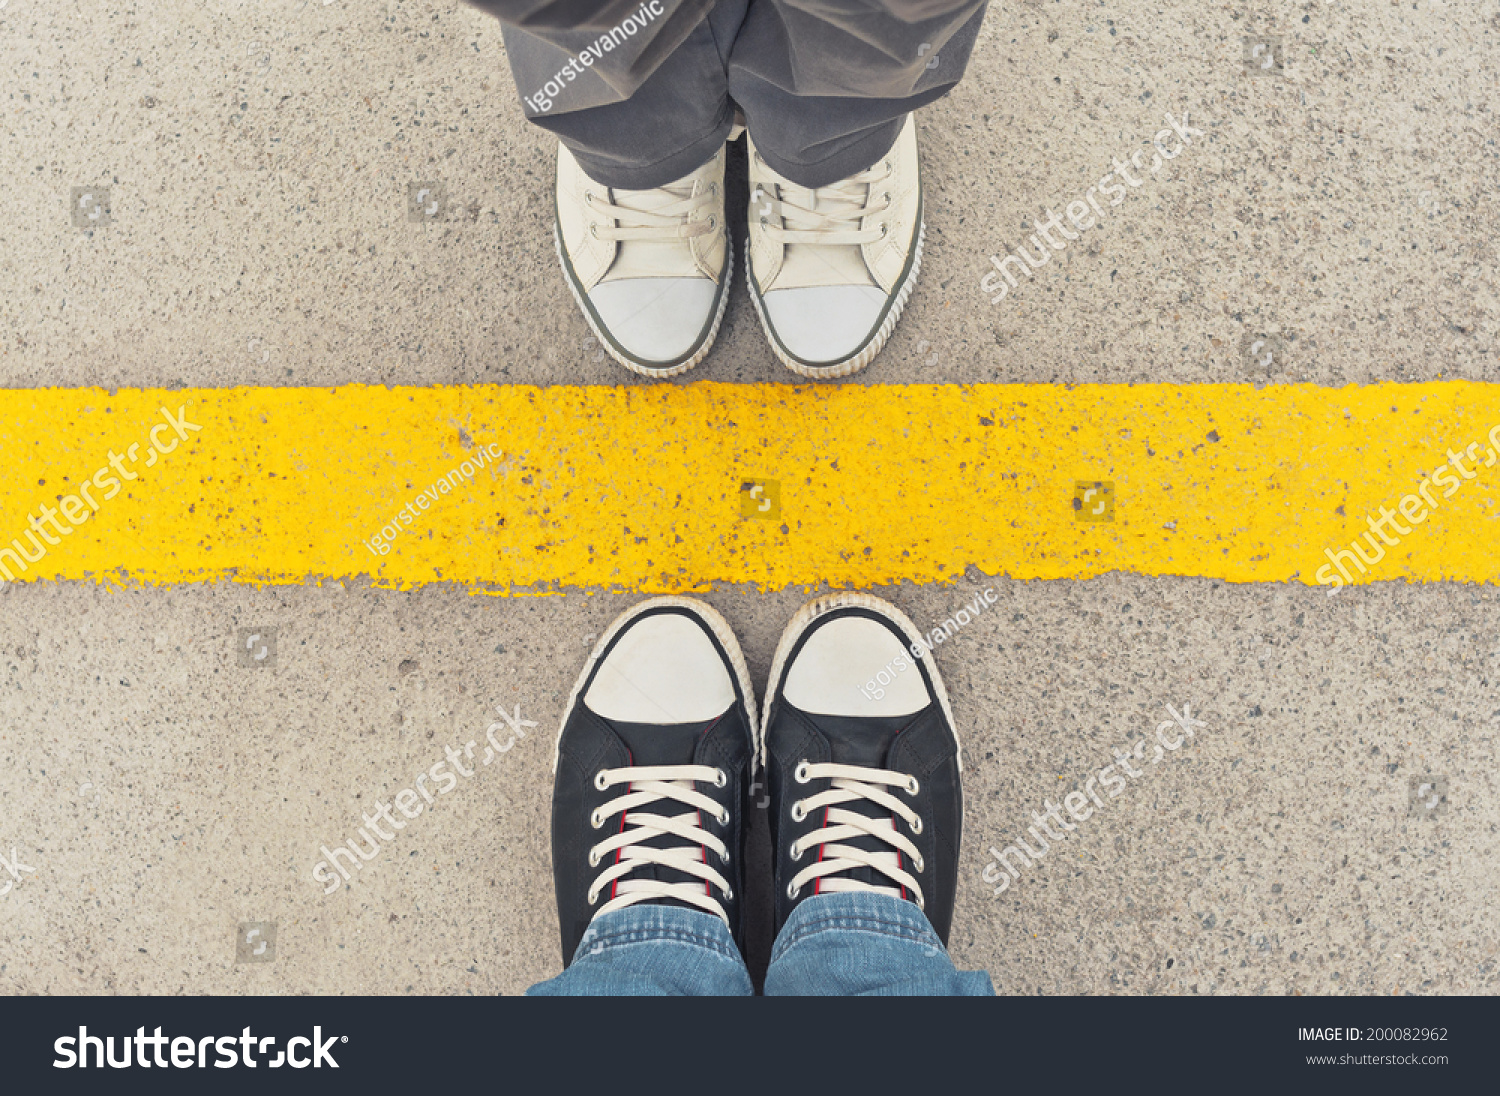 Top View of Sneakers from above, Male and female feet in sneakers, standing at dividing frontier line. #200082962